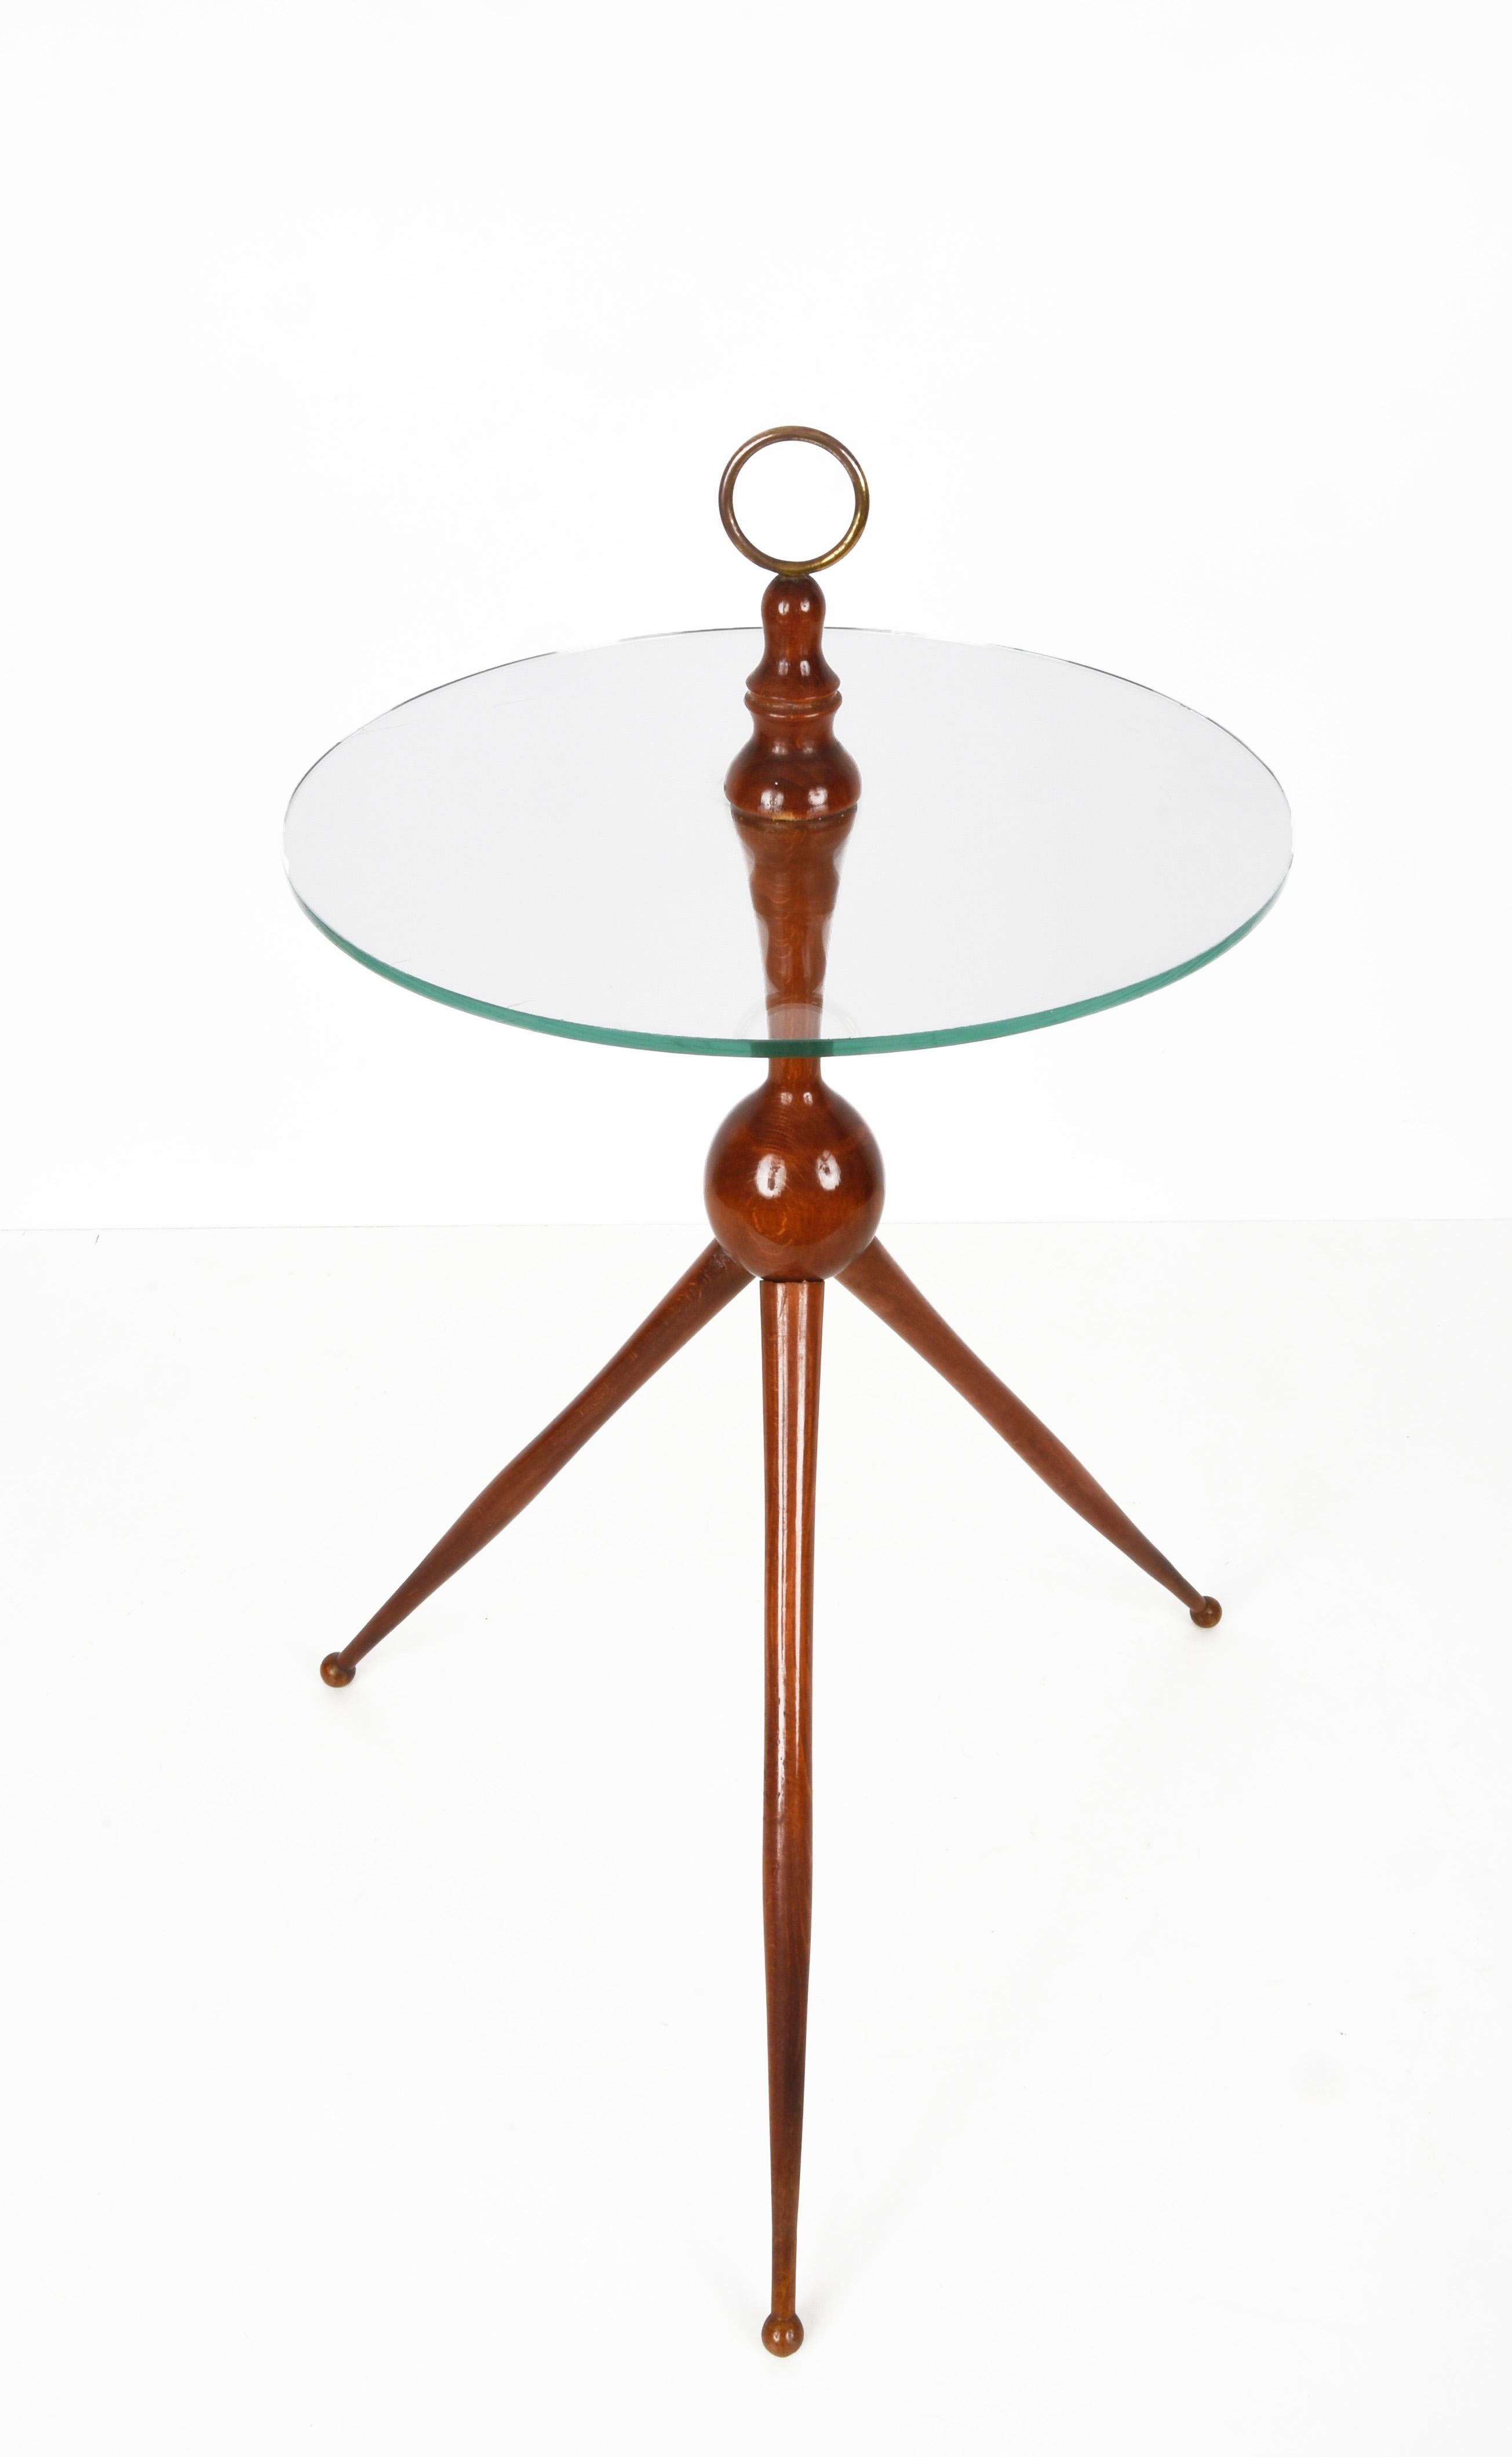 Amazing midcentury wood and glass tripod coffee table with brass finishes. This outstanding piece was designed in Italy during the 1950s by Cesare Lacca.

This elegant midcentury coffee table is a symbol of excellent workmanship by iconic designer